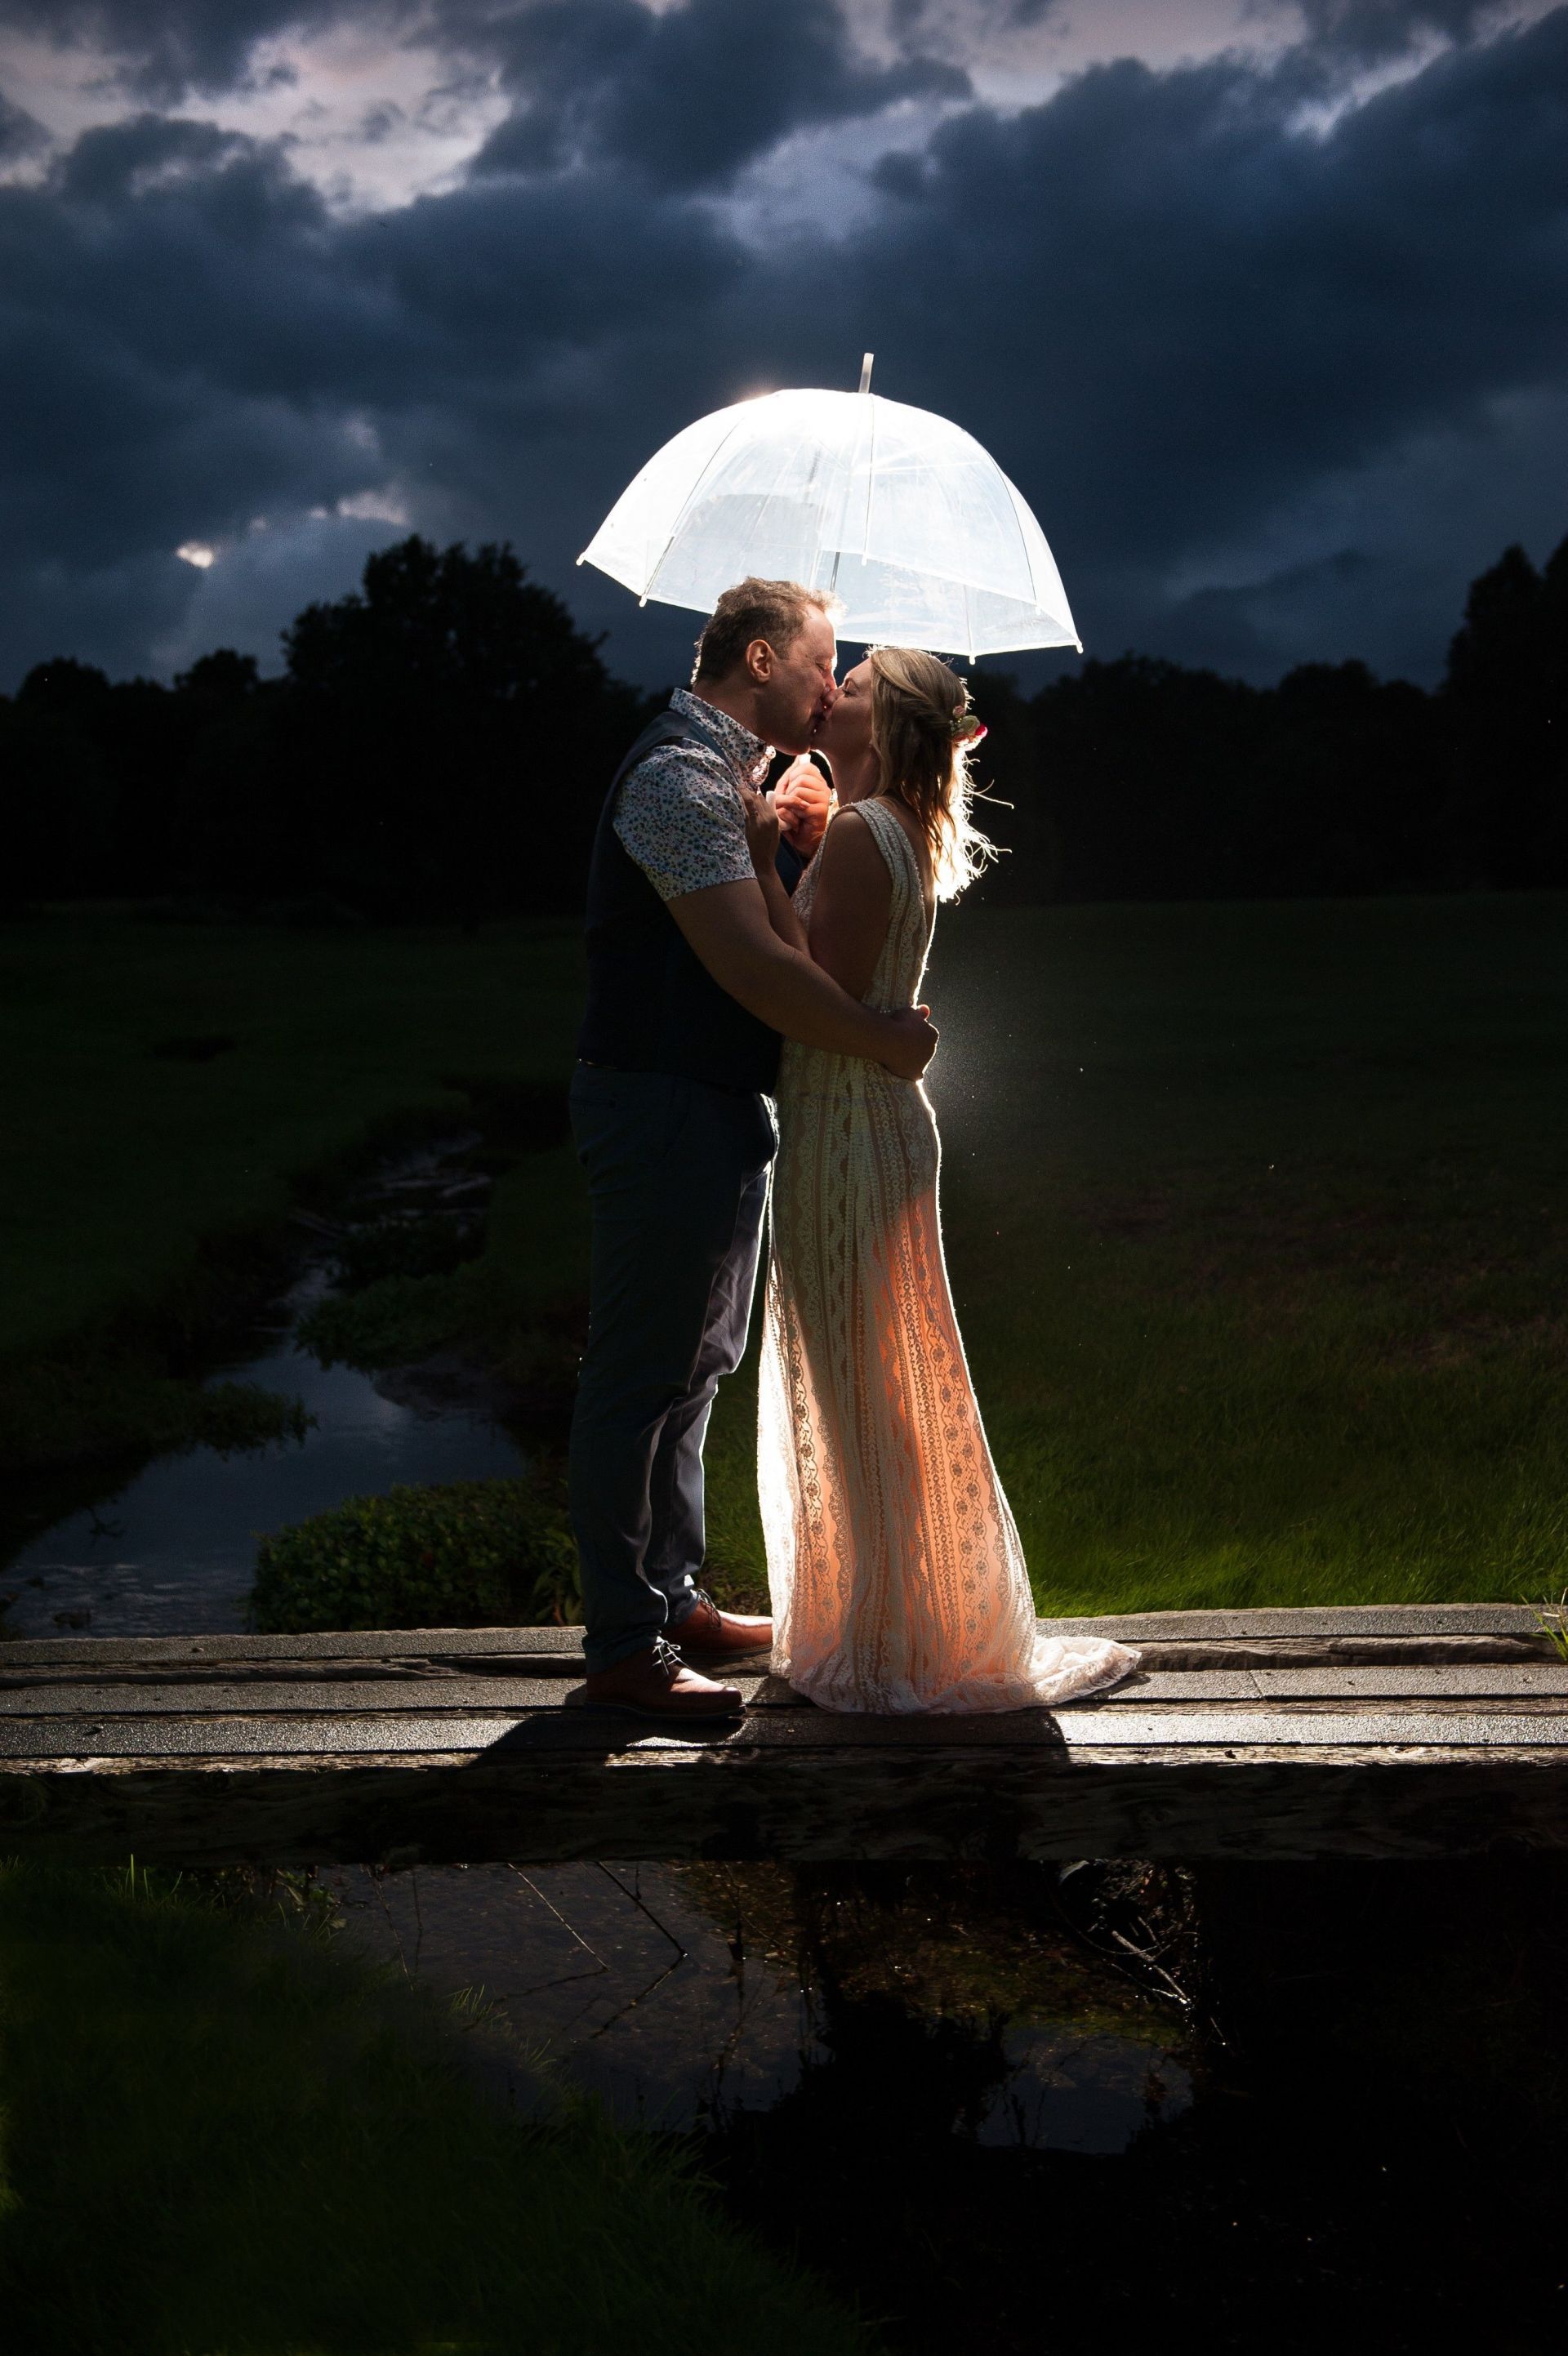 Bride and Groom kissing underneath an umbrella at night with a dark stormy sky